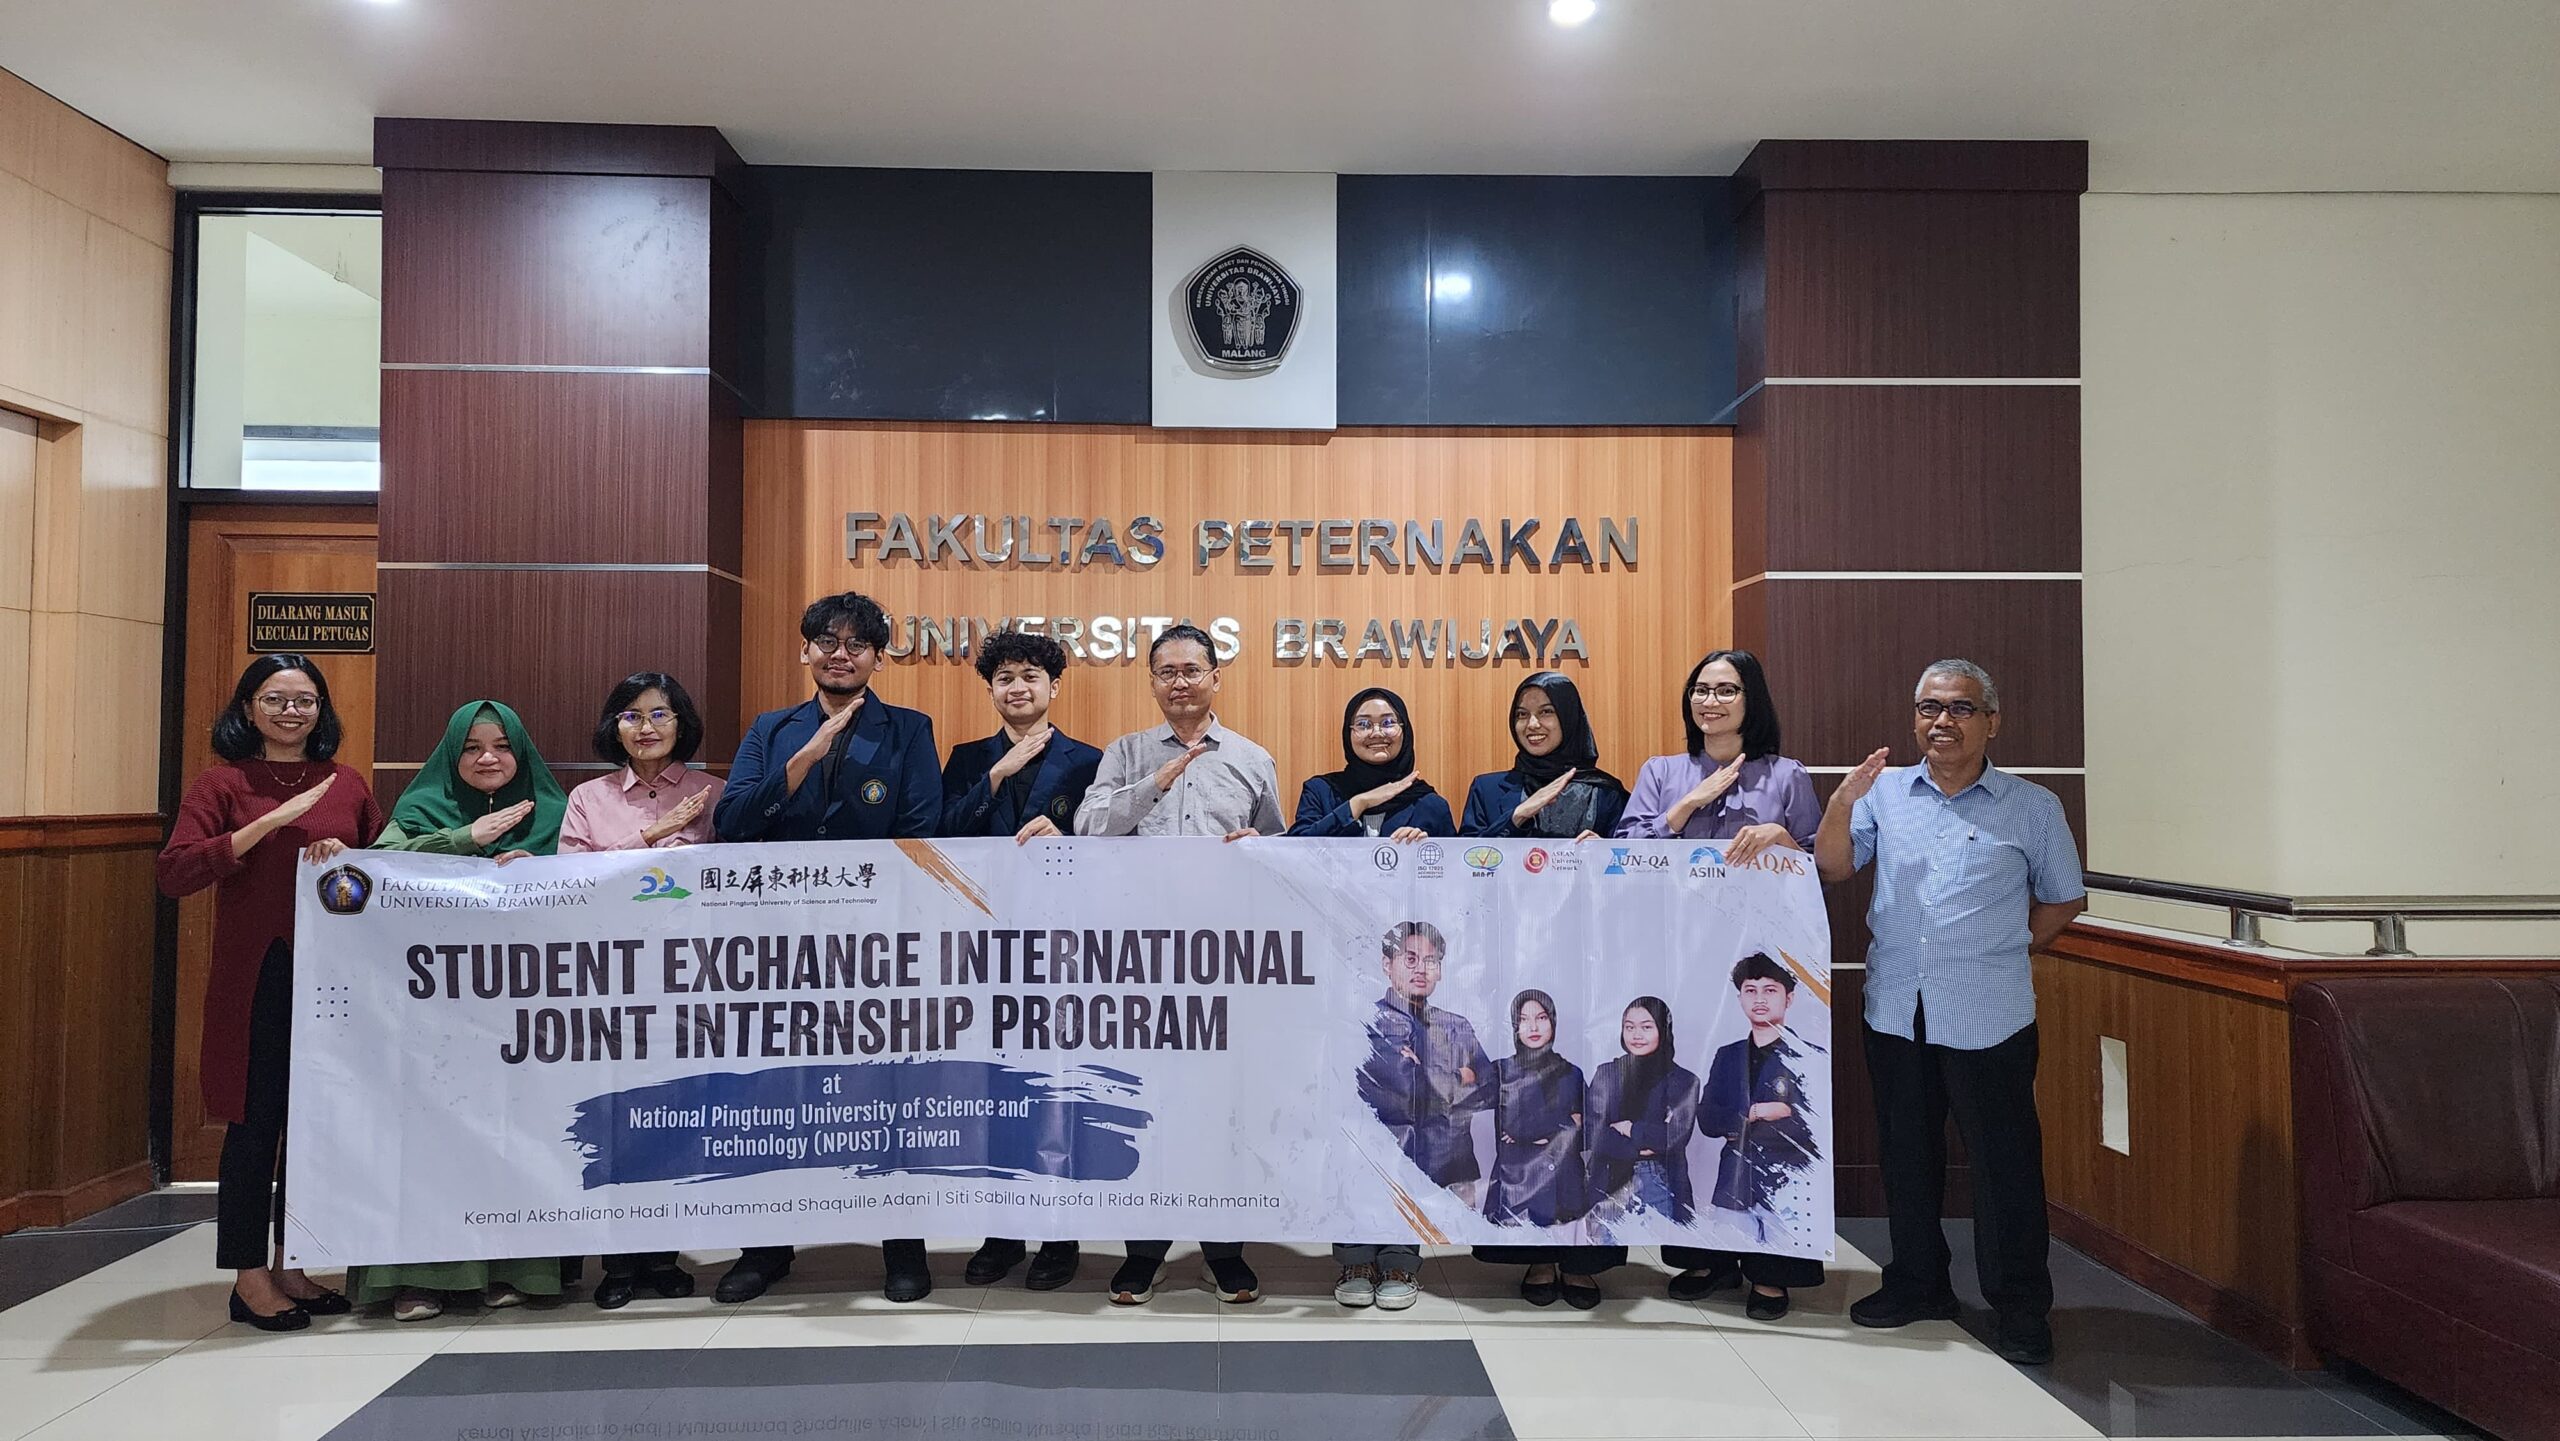 8 UB FAPET Students Study Abroad in Taiwan and Thailand Campuses